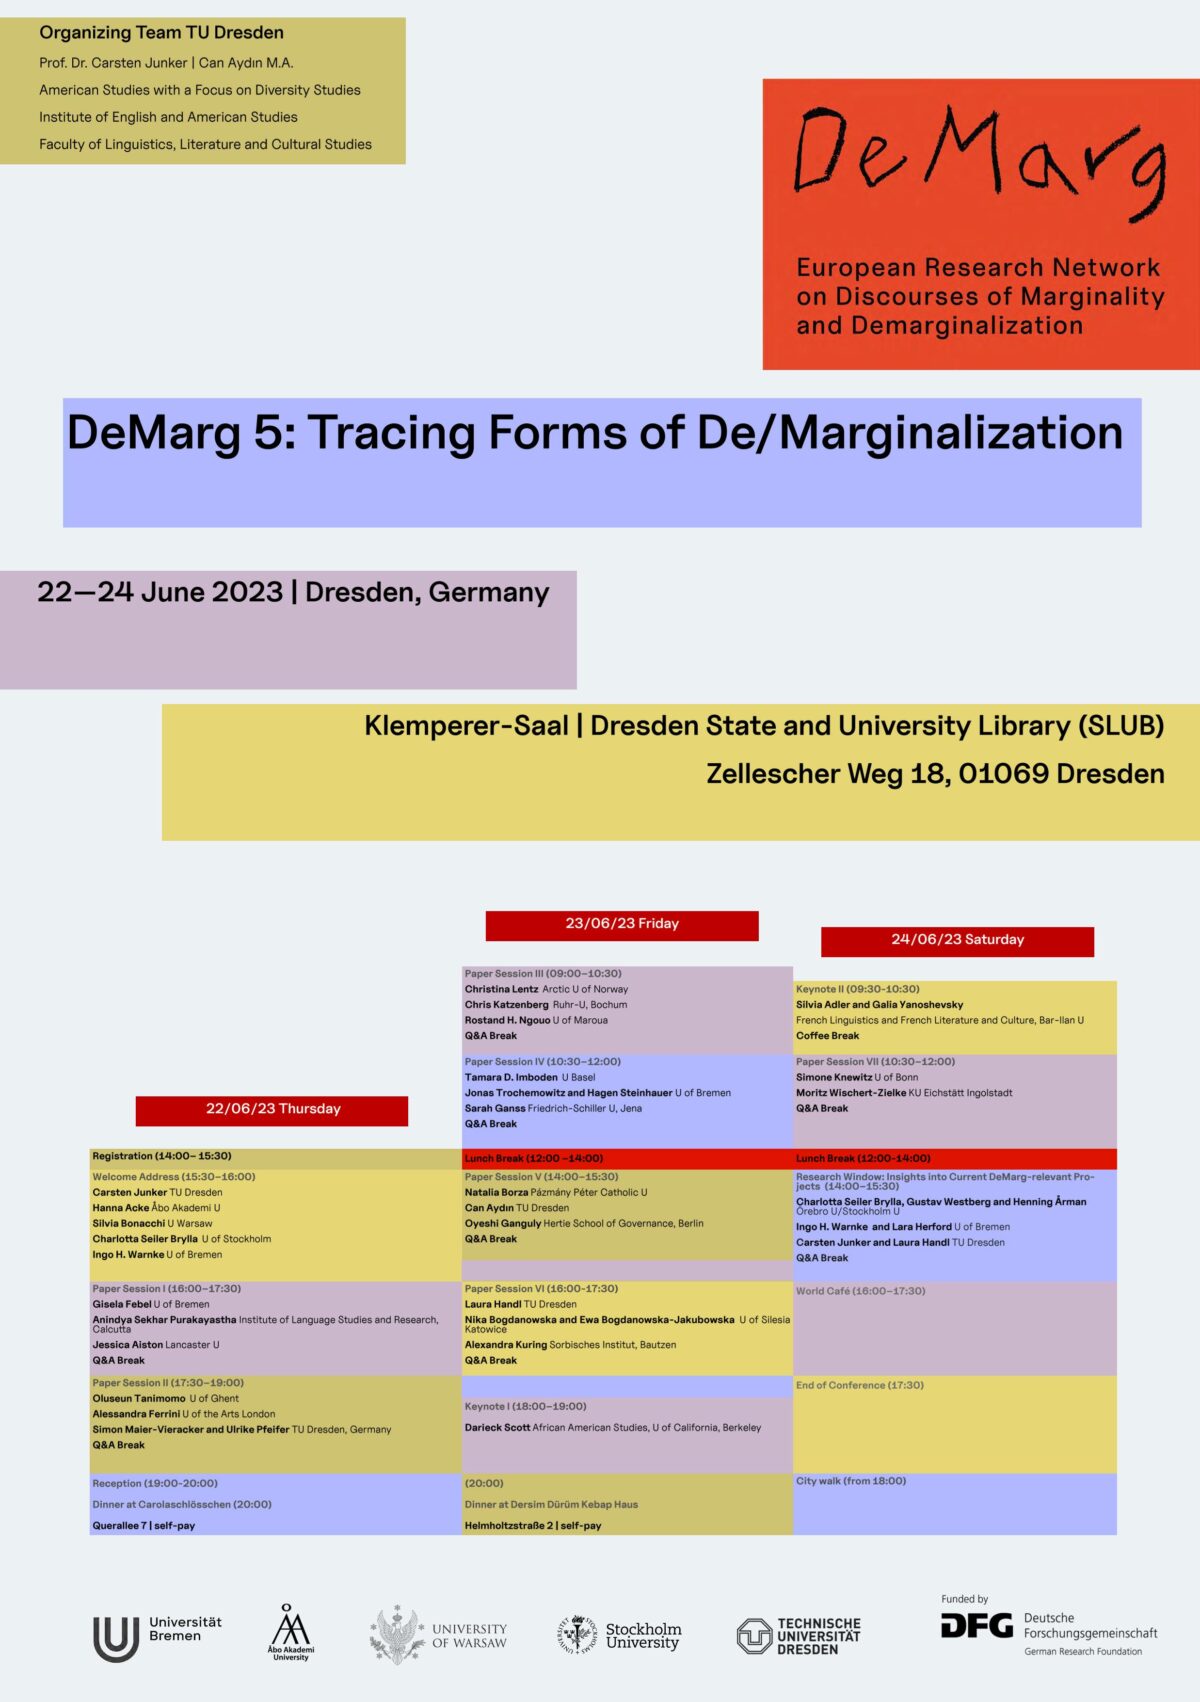 Poster der DeMarg (European Research Network on Discourses of Marginality and Demarginalization) DeMarg 5: Tracing Forms of De/Marginalization